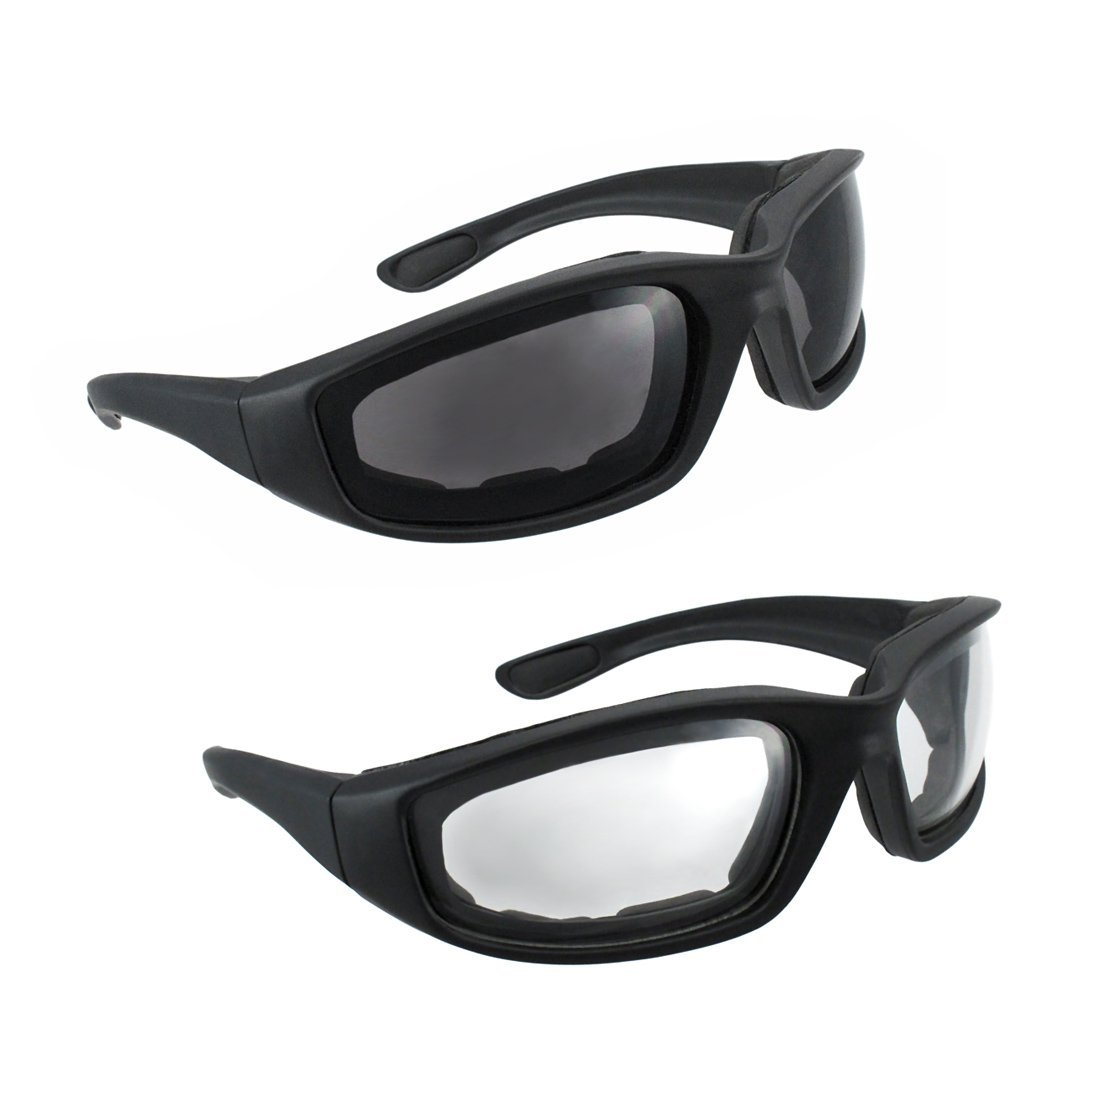 Motorcycle Riding Glasses set, one smoke and one clear